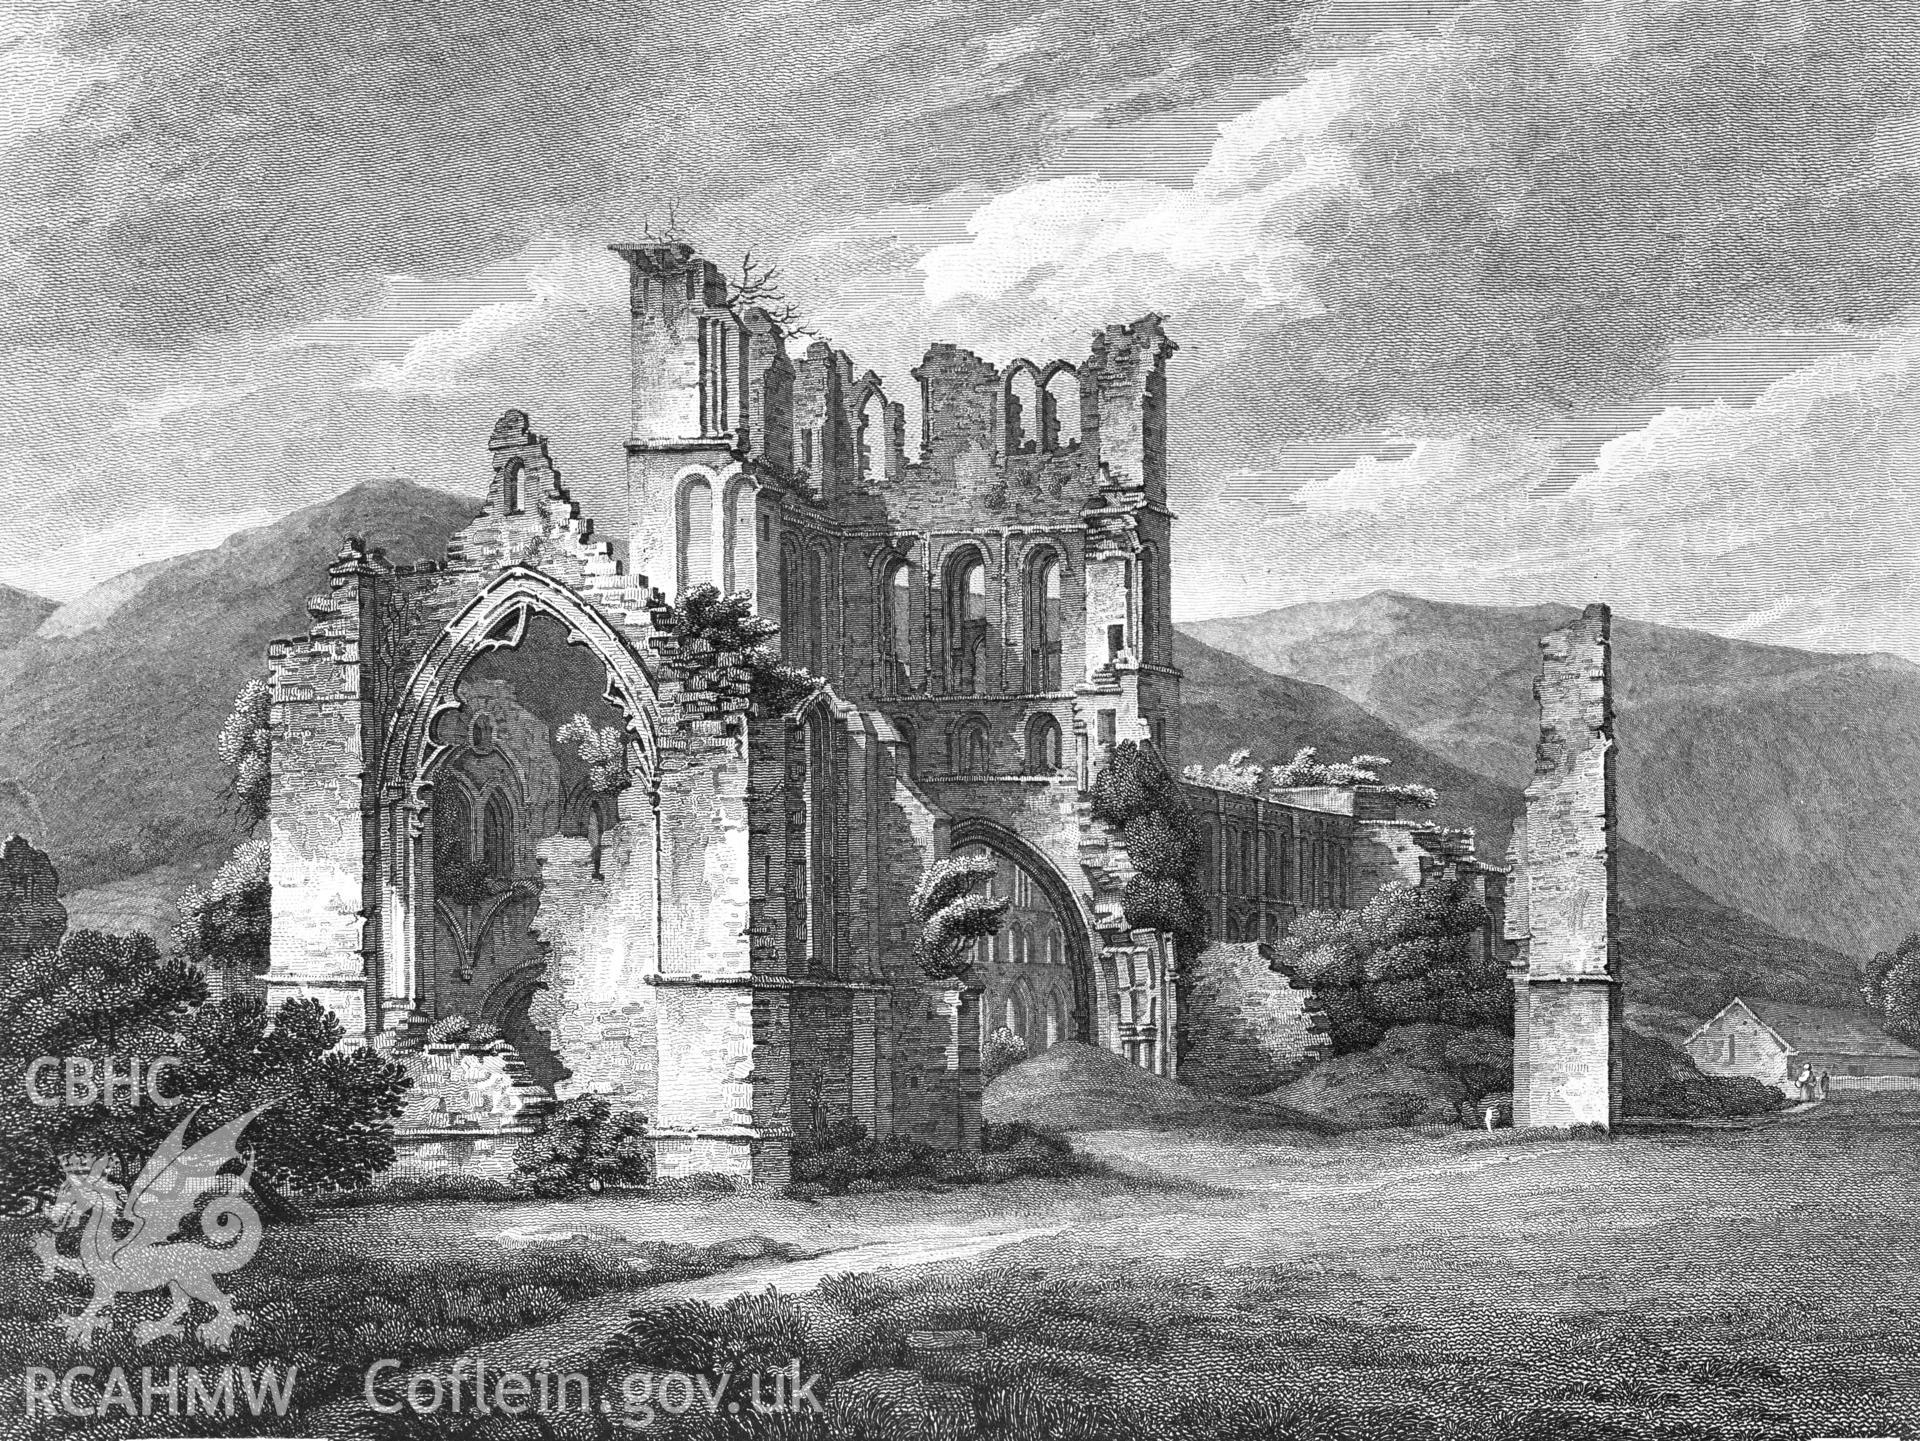 Black and white negative relating to Llanthony Abbey: view from the east, 1788. Taken from a Guide Book by the Society of Antiquaries.